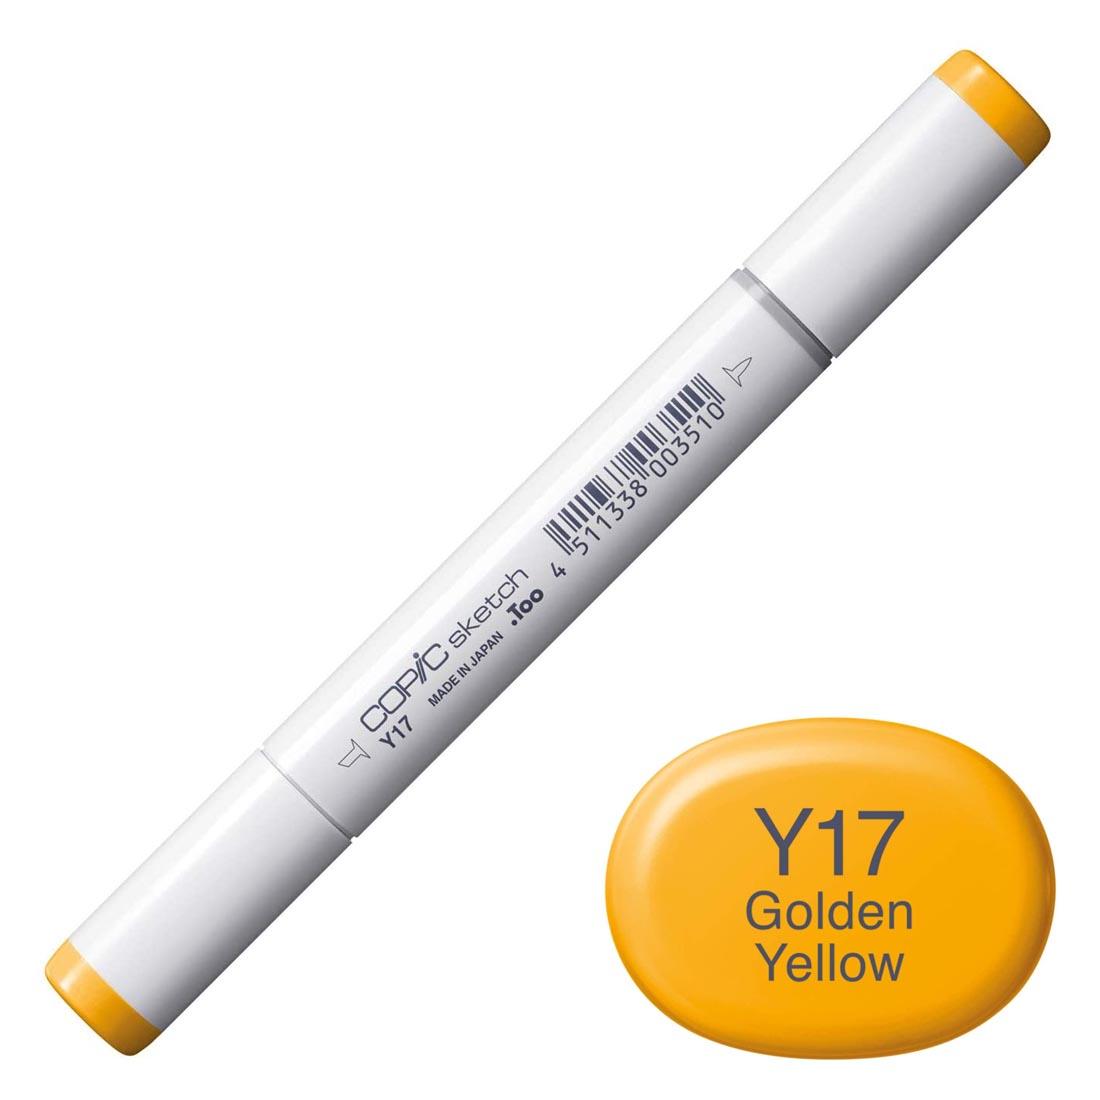 COPIC Sketch Marker with a color swatch and text of Y17 Golden Yellow